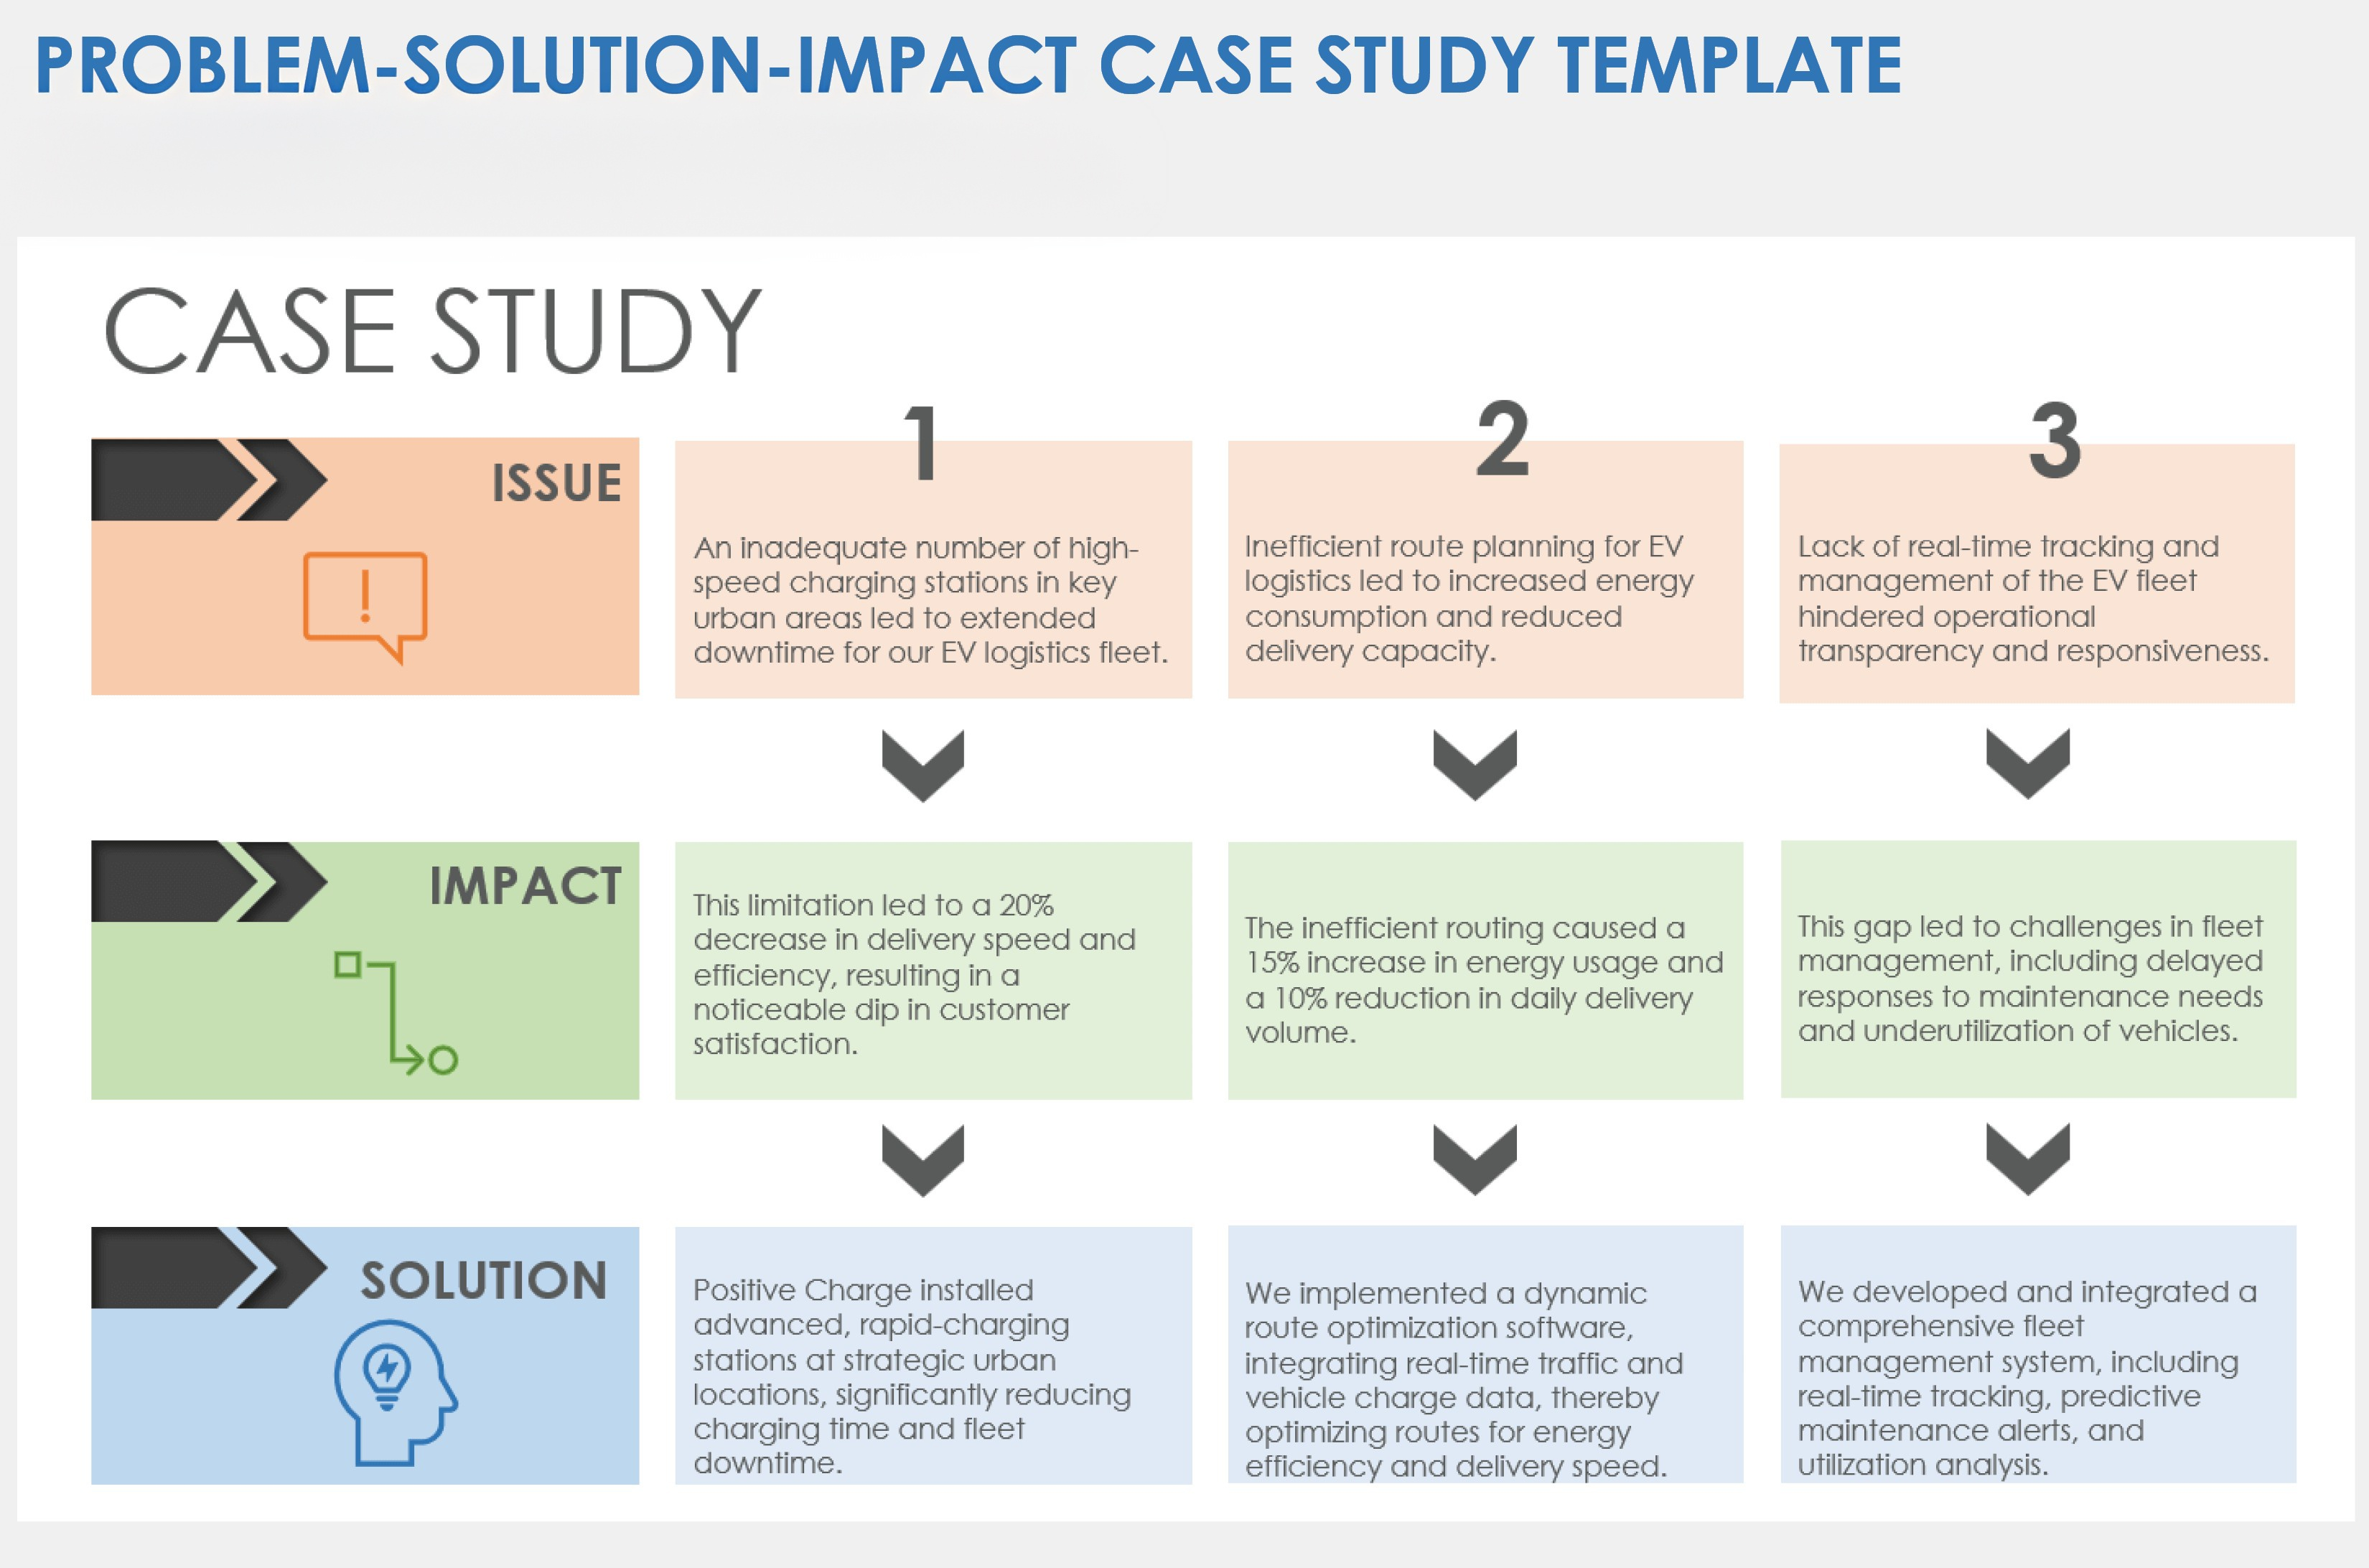 Problem-Solution-Impact Case Study Example Template